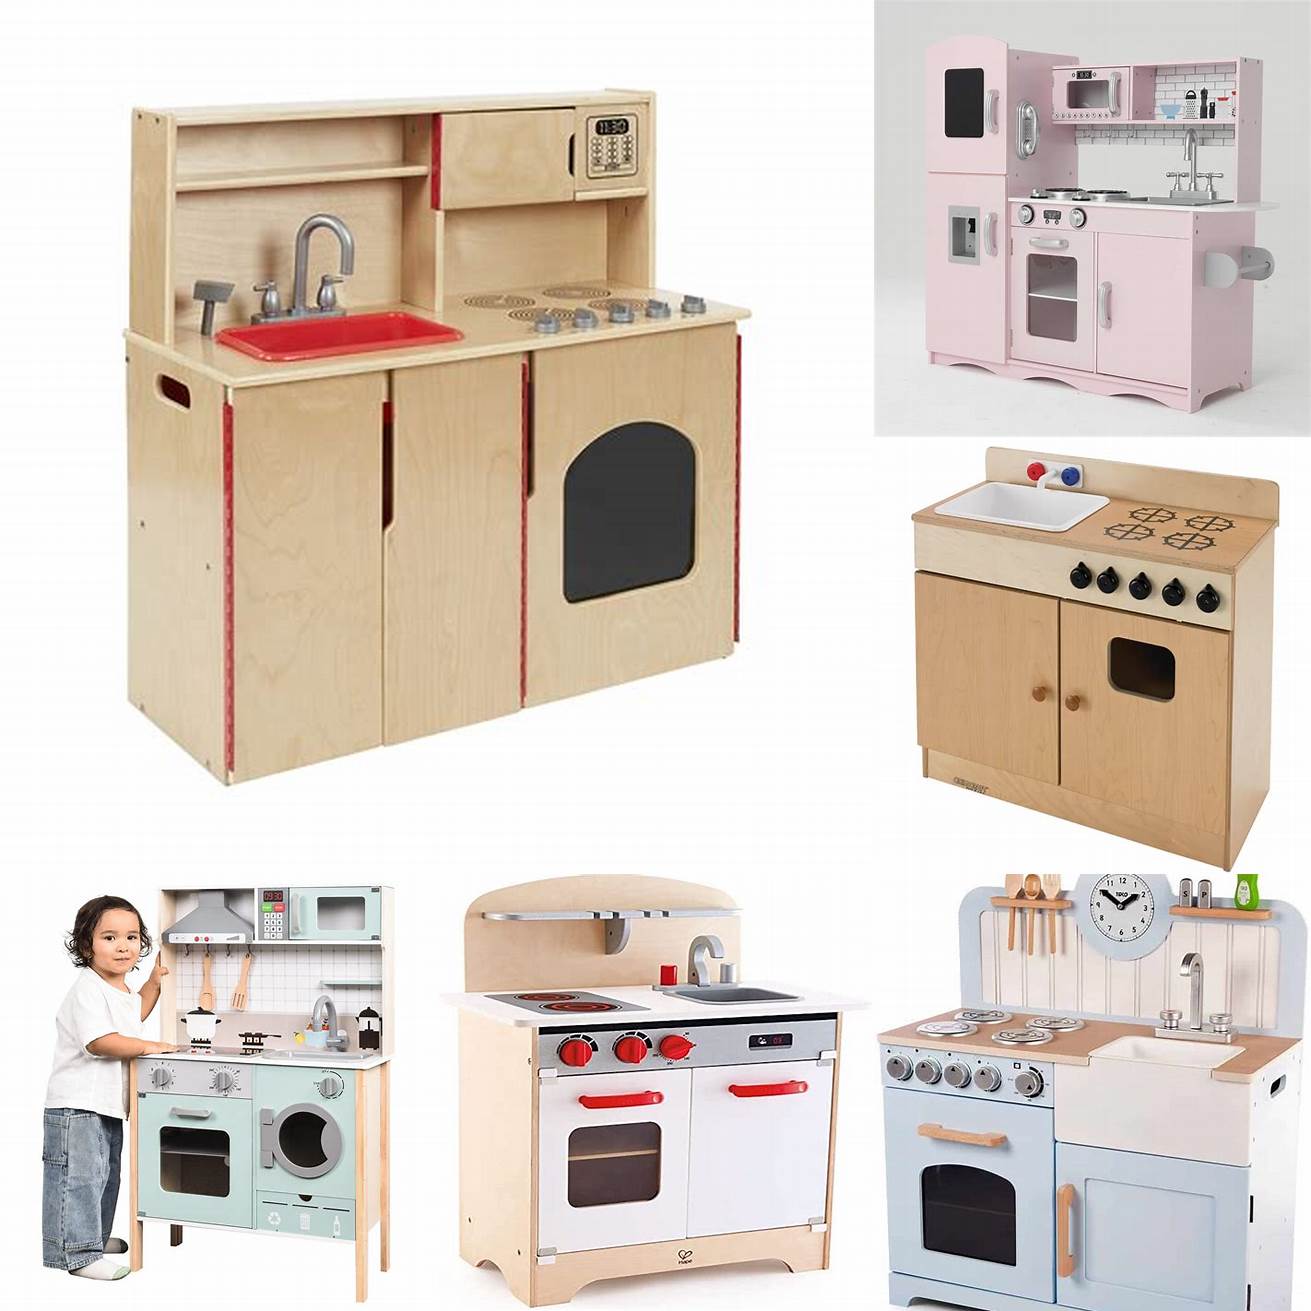 A wooden play kitchen with a sink and oven